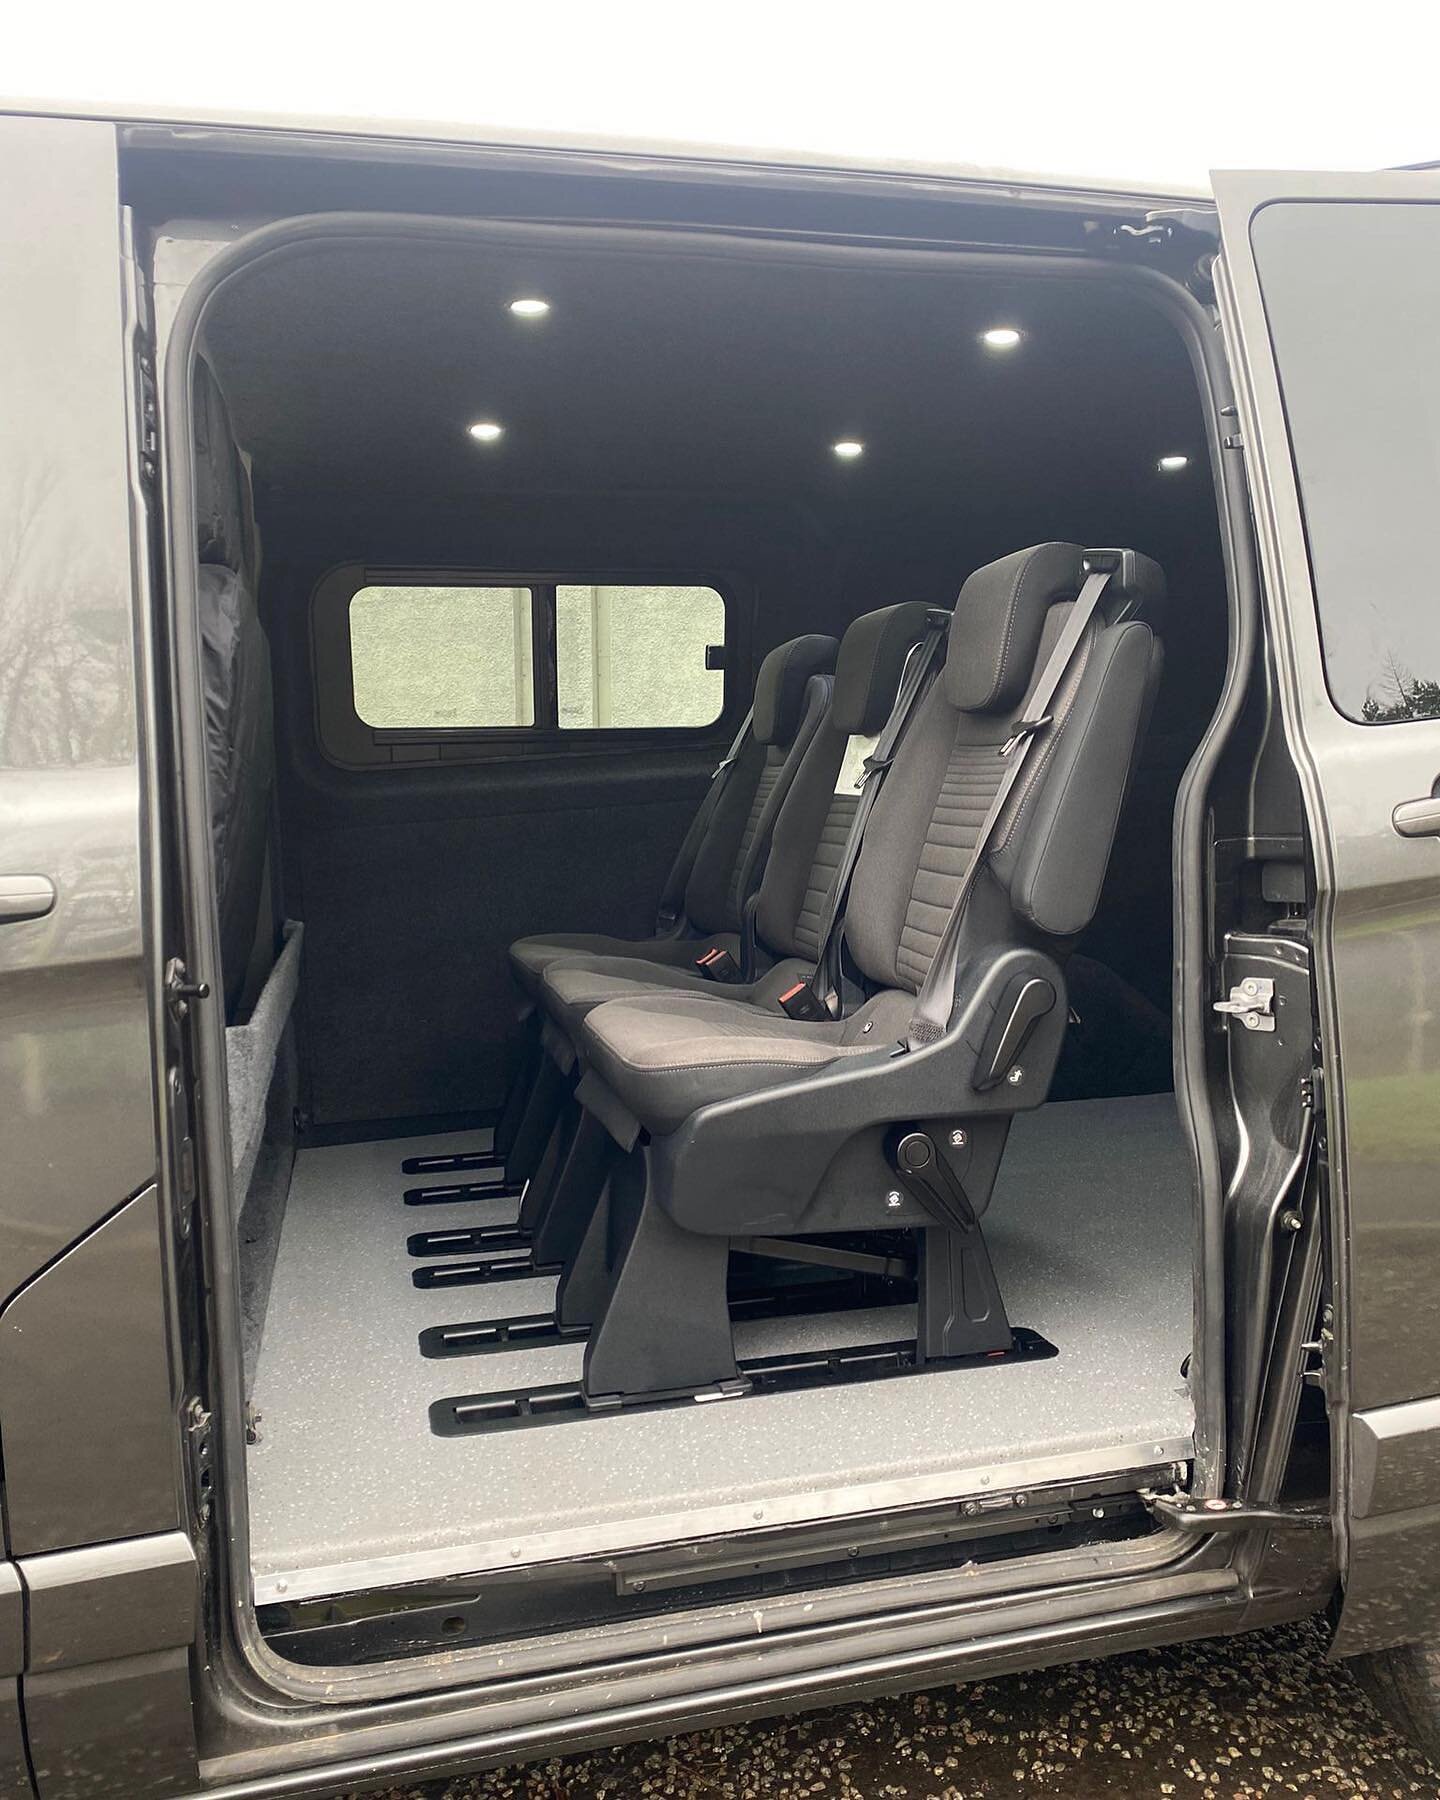 💺 Looking For Extra Seats? We have 3 remaining sets of new seats that are Reclinable, Foldable and Removable. 

📍18 Albion Way, East Kilbride
📞 01355 206177
📧 Info@northviewcustoms.co.uk